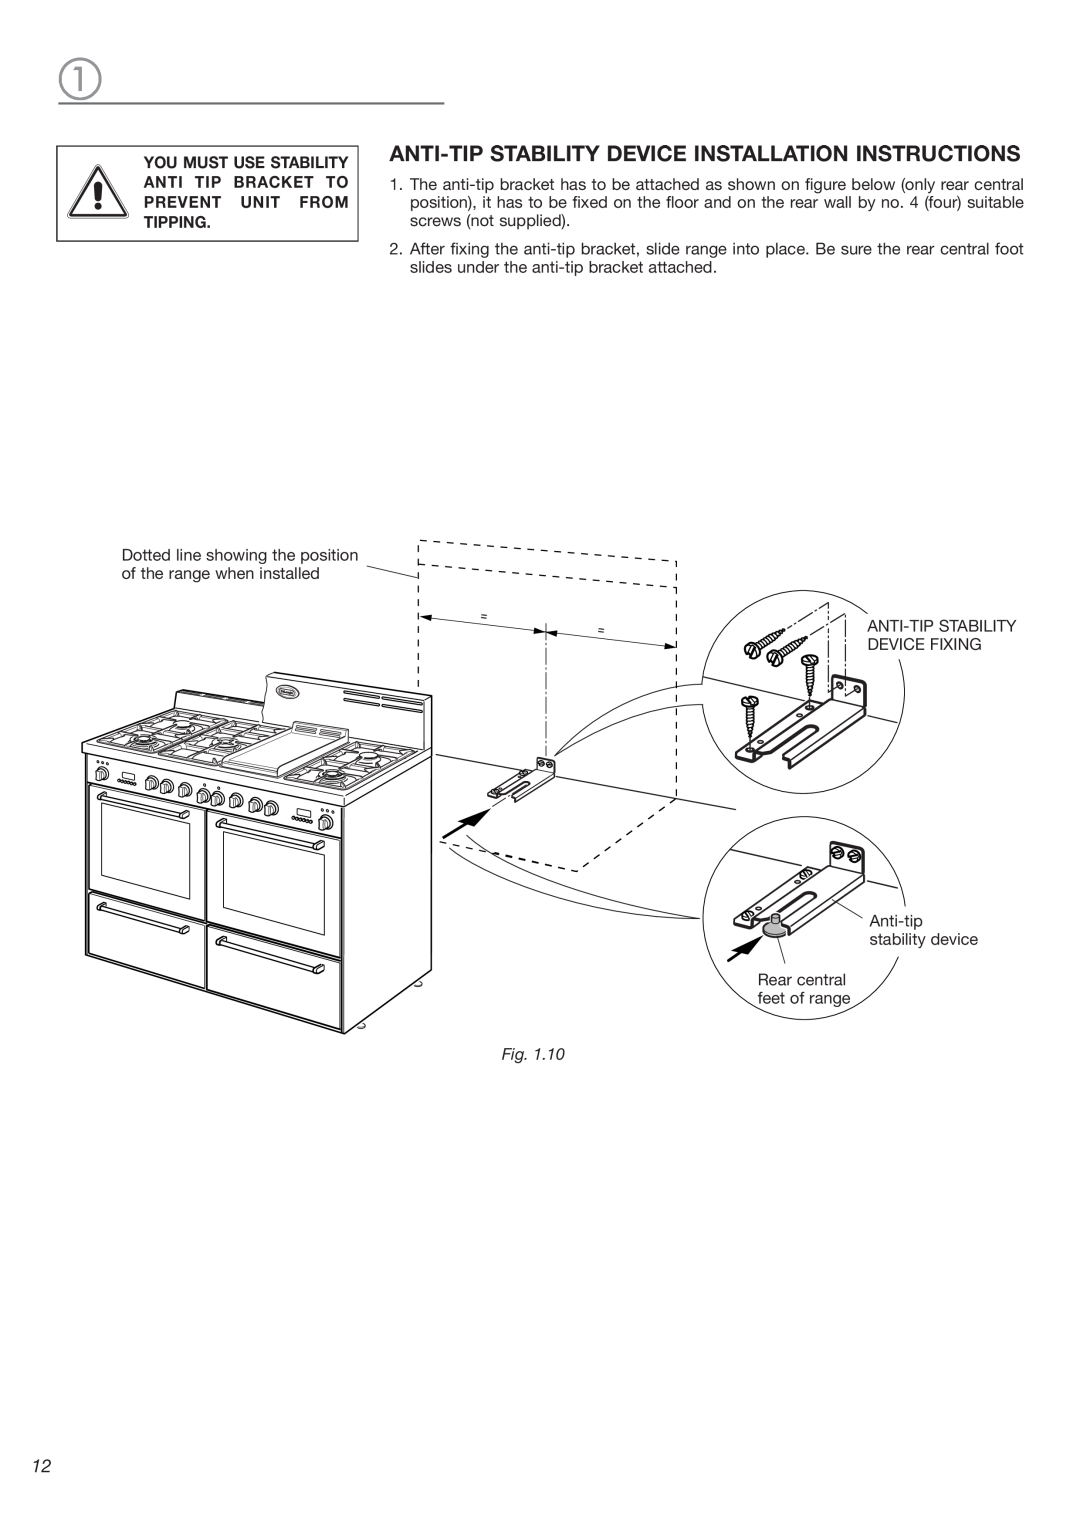 DeLonghi DL 48 P6G, DL48P6G-E warranty Anti-Tip Stability Device Installation Instructions 